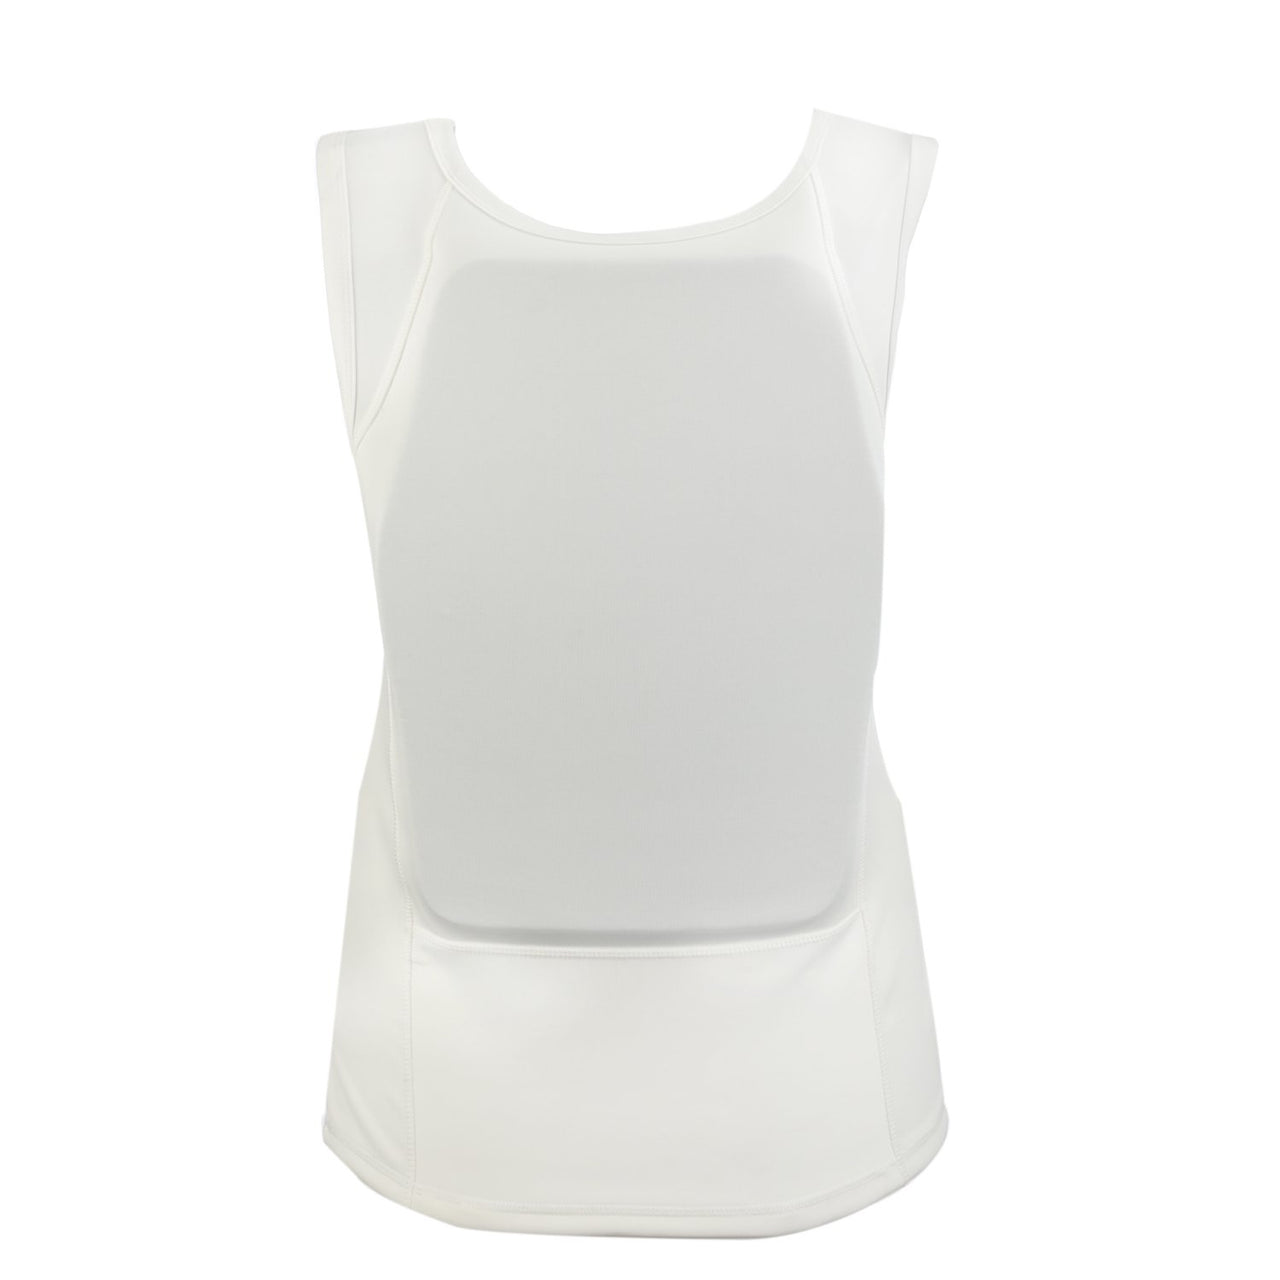 The back view of a Body Armor Direct Concealable Express T-Shirt Carrier for women.